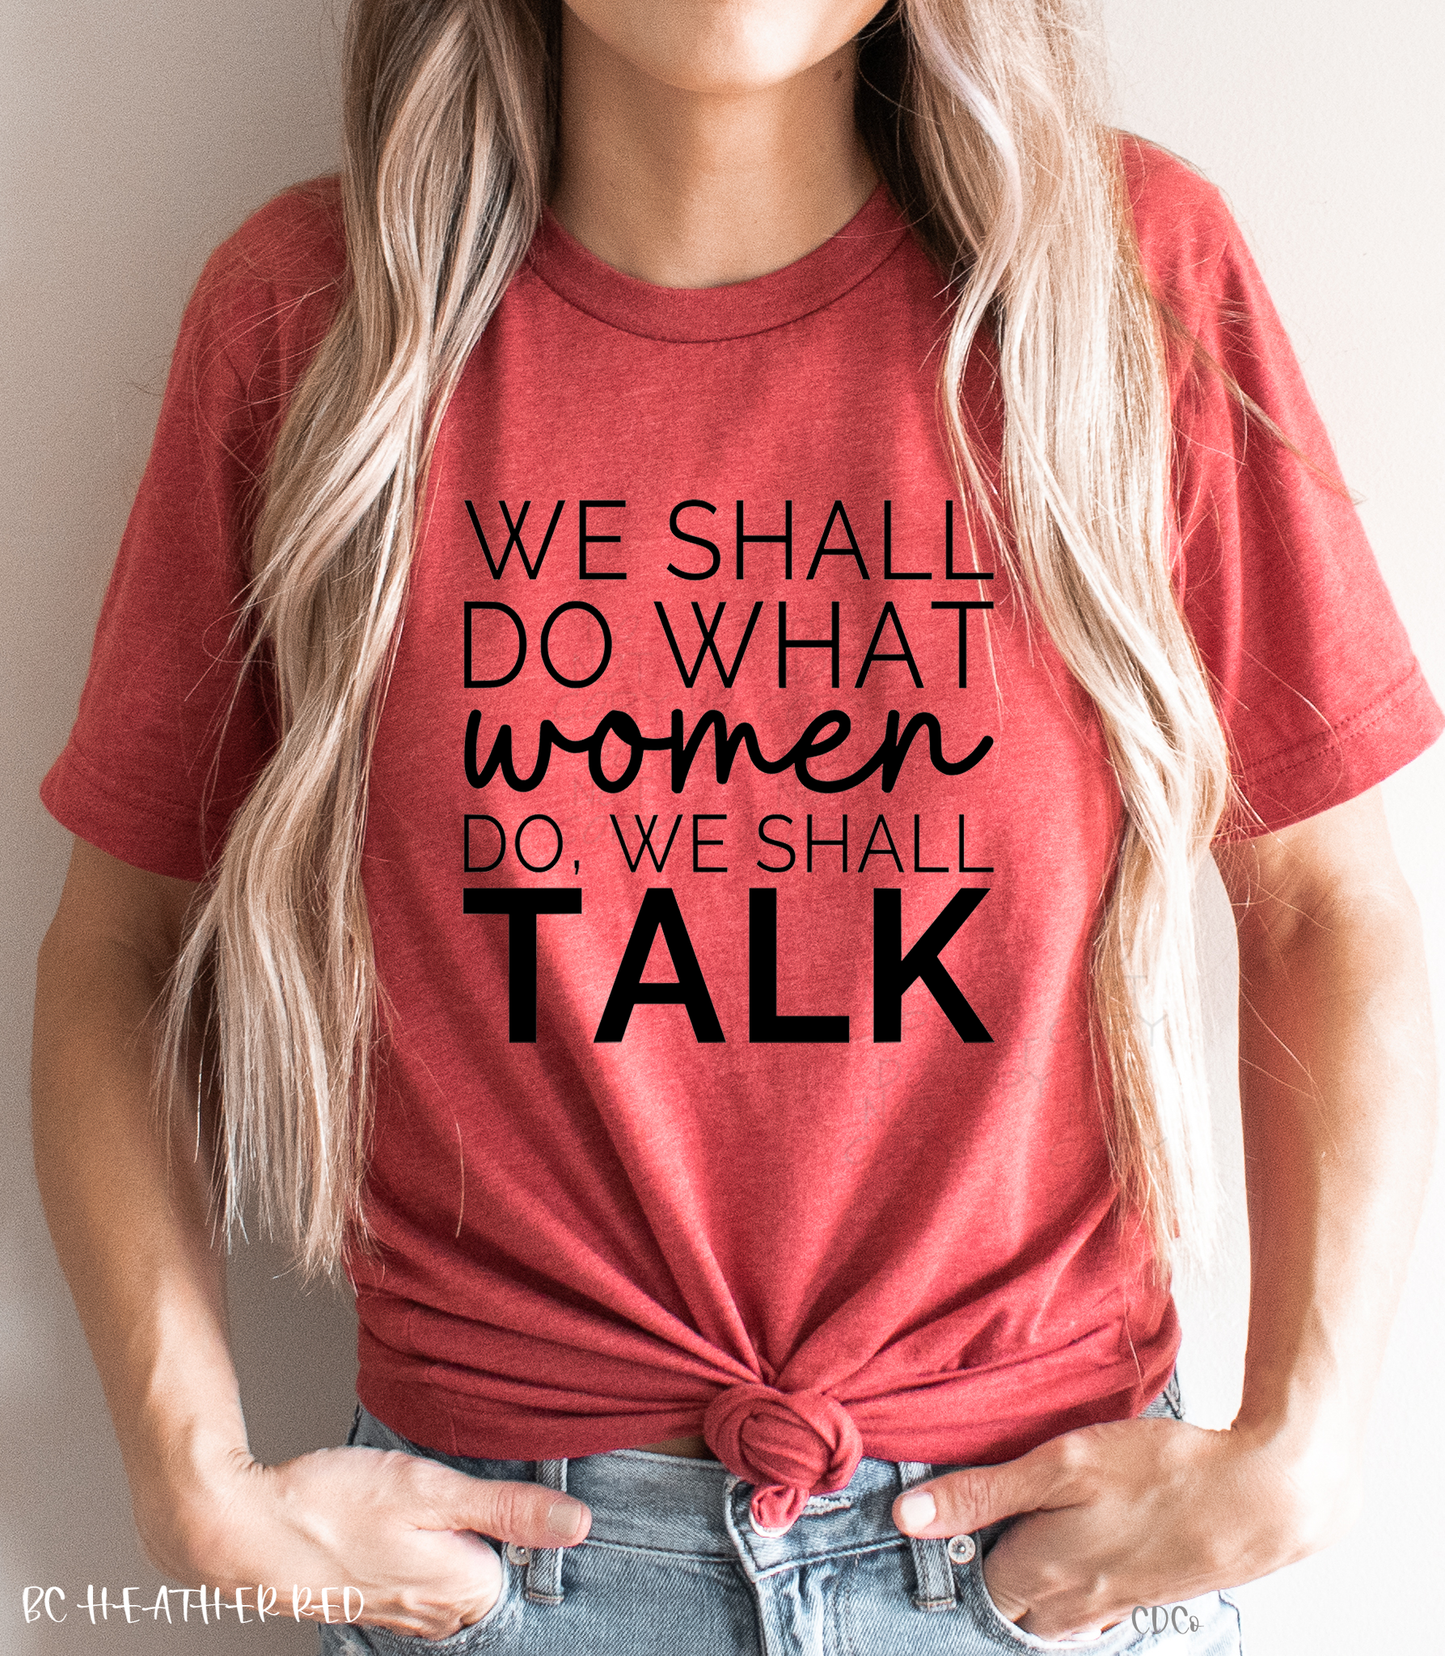 We Shall Do What Women Do, We Shall Talk (325°)